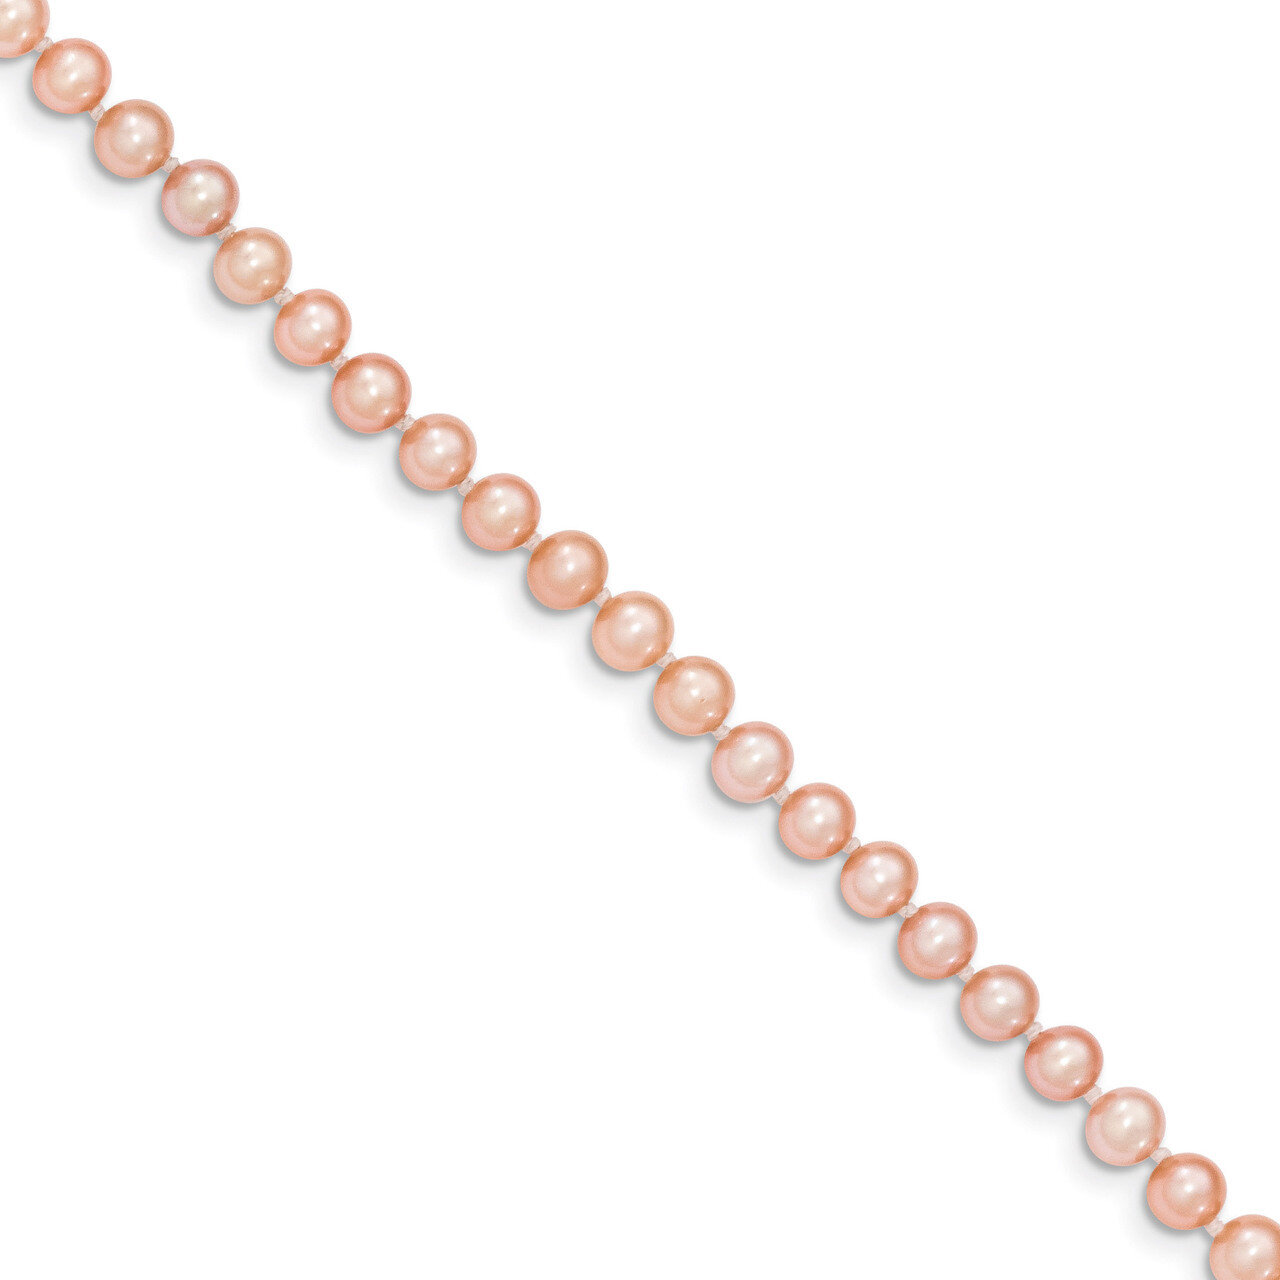 4-5mm Pink Cultured Near Round Pearl Necklace 18 Inch 14k Gold PPN040-18